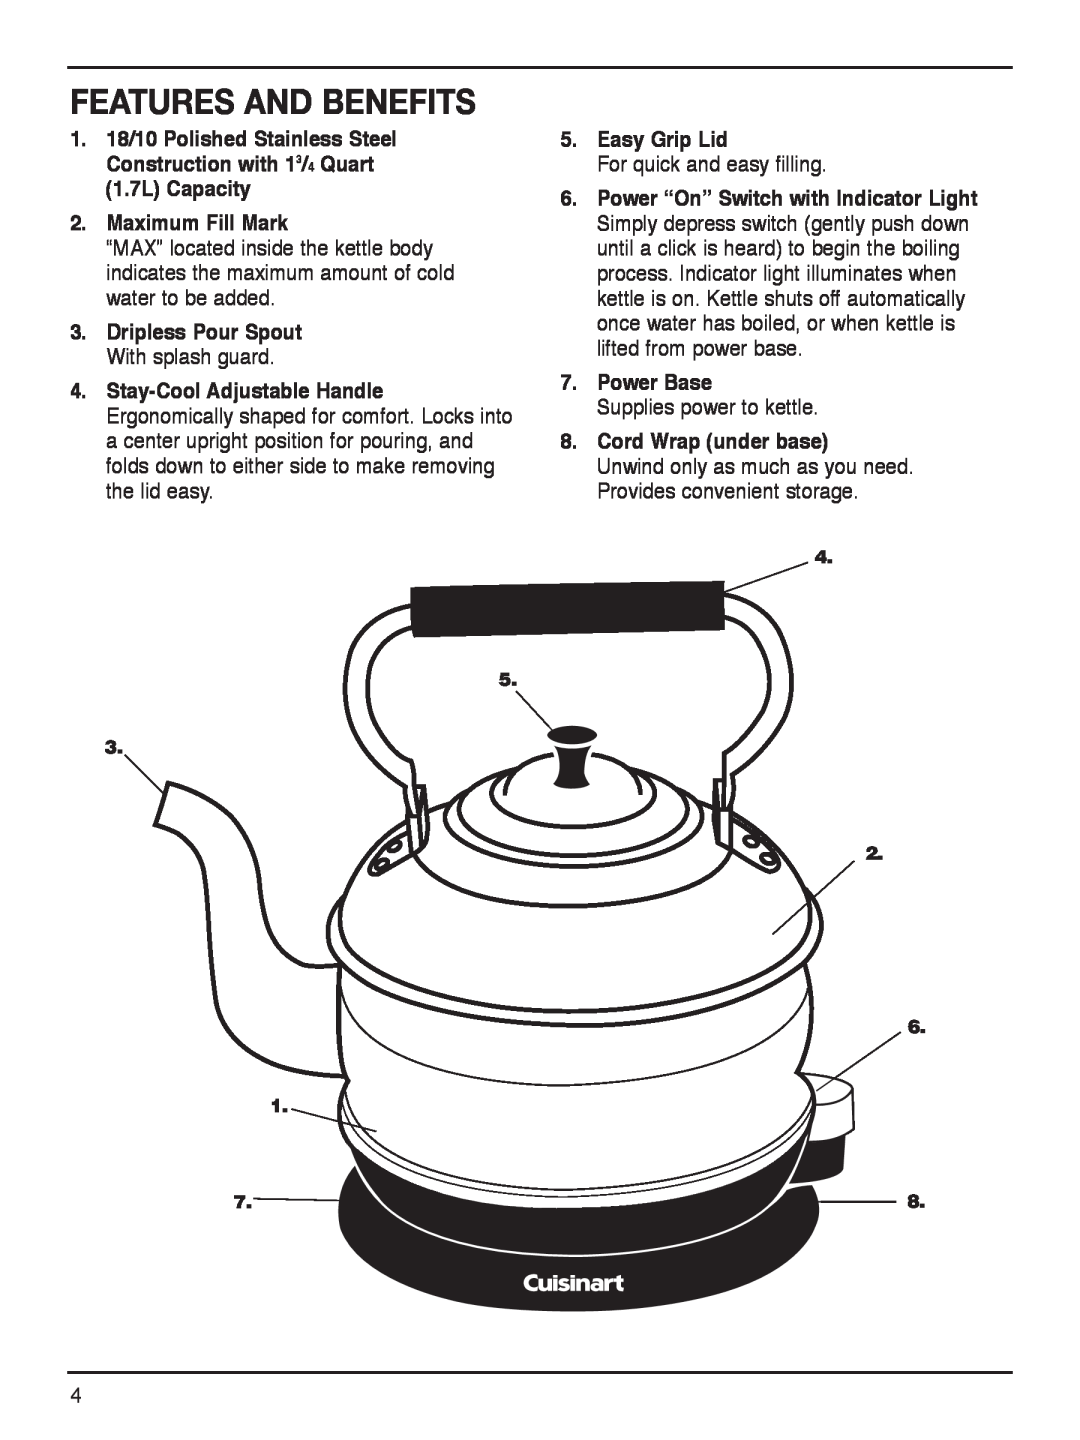 Cuisinart RK-17 manual Features And Benefits, Maximum Fill Mark, Easy Grip Lid, Power Base, Cord Wrap under base 